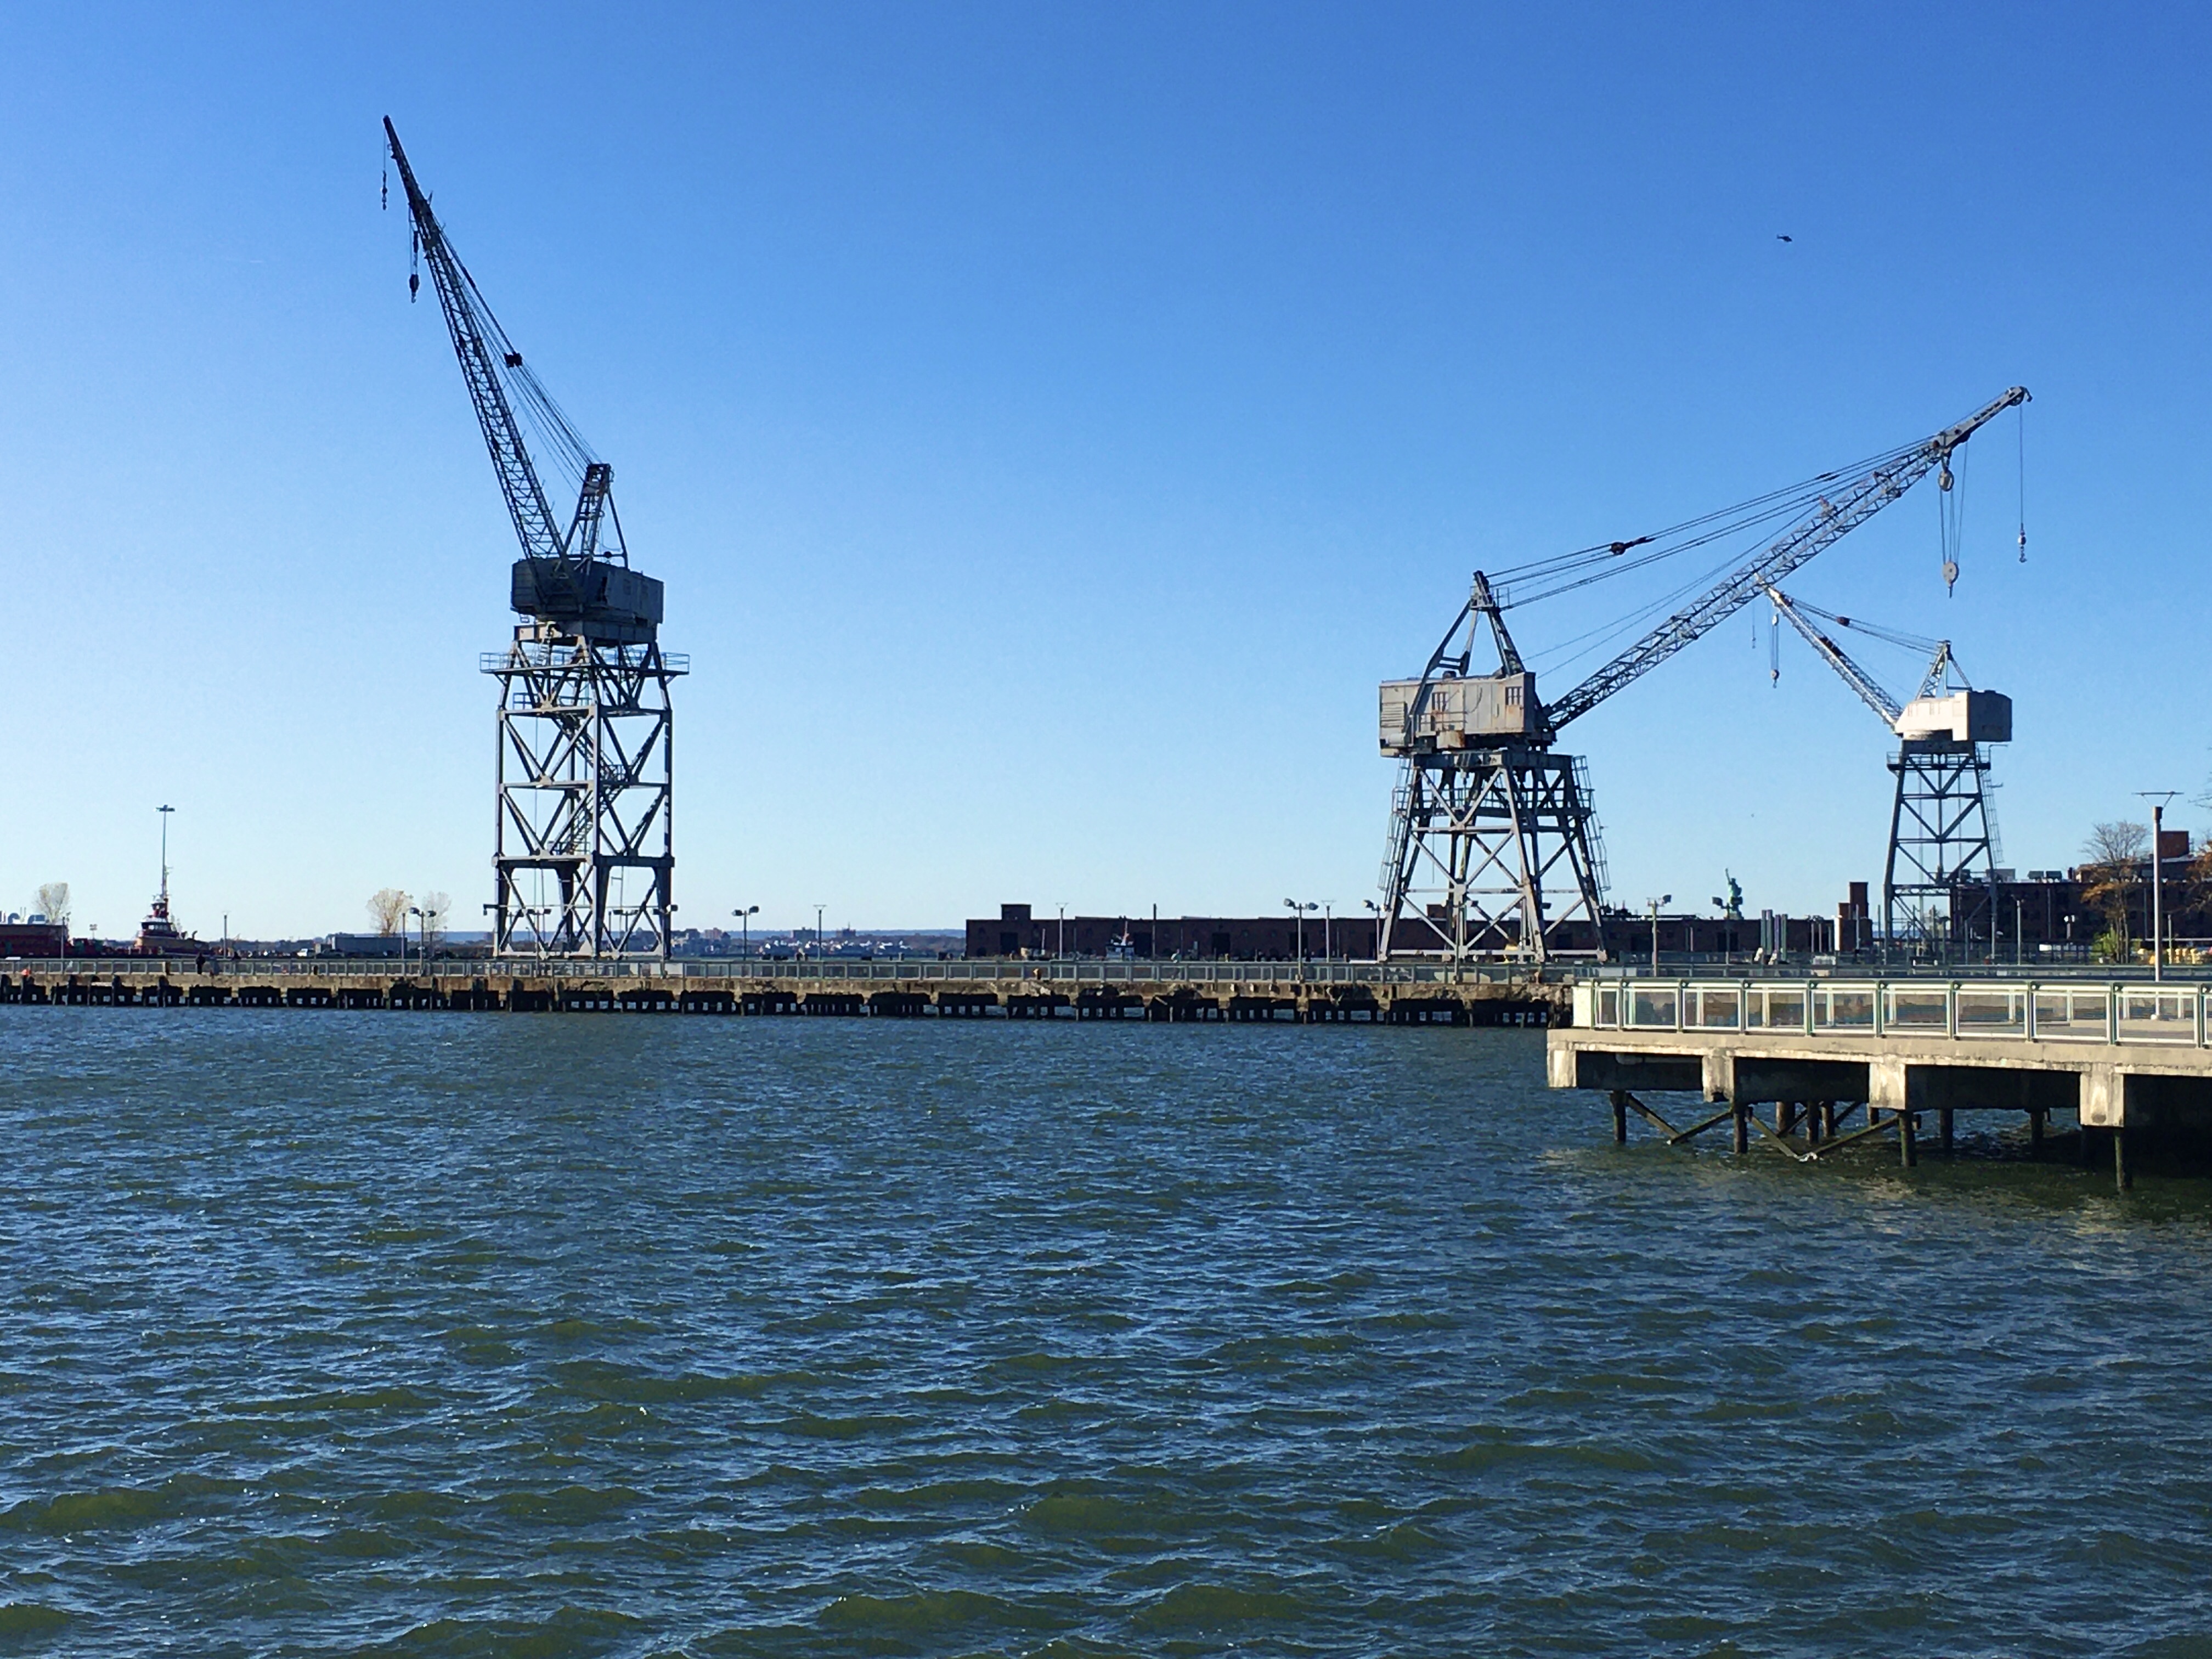 Gantry cranes add drama to the horizon at Erie Basin Park. Eagle photo by Lore Croghan